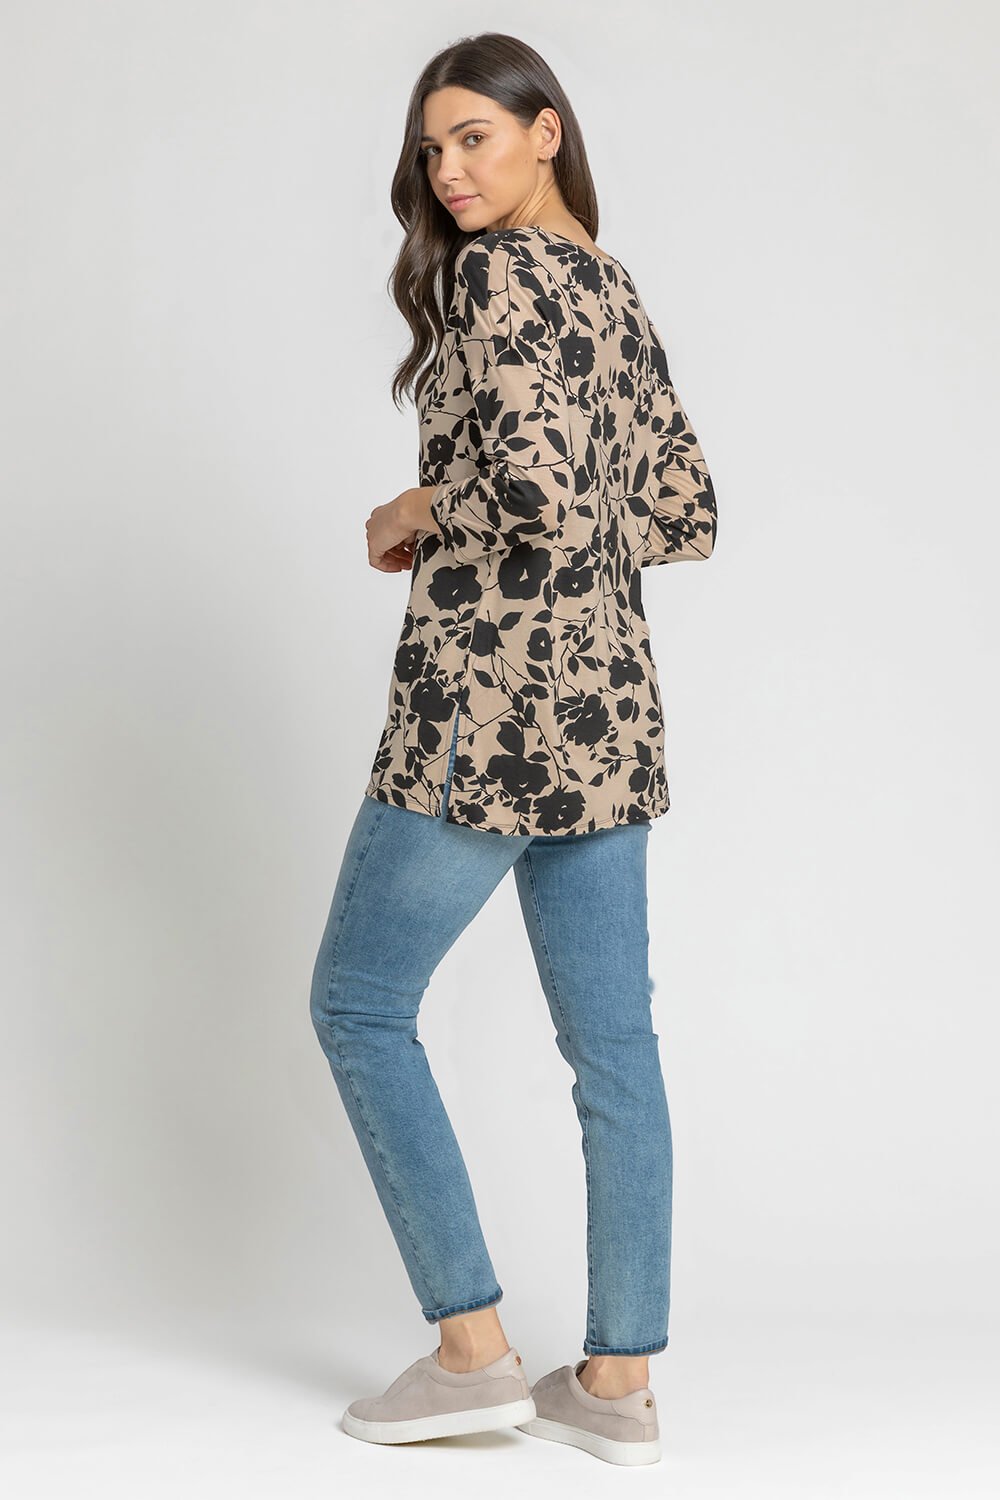 Beige Floral Print Top and Snood, Image 2 of 4